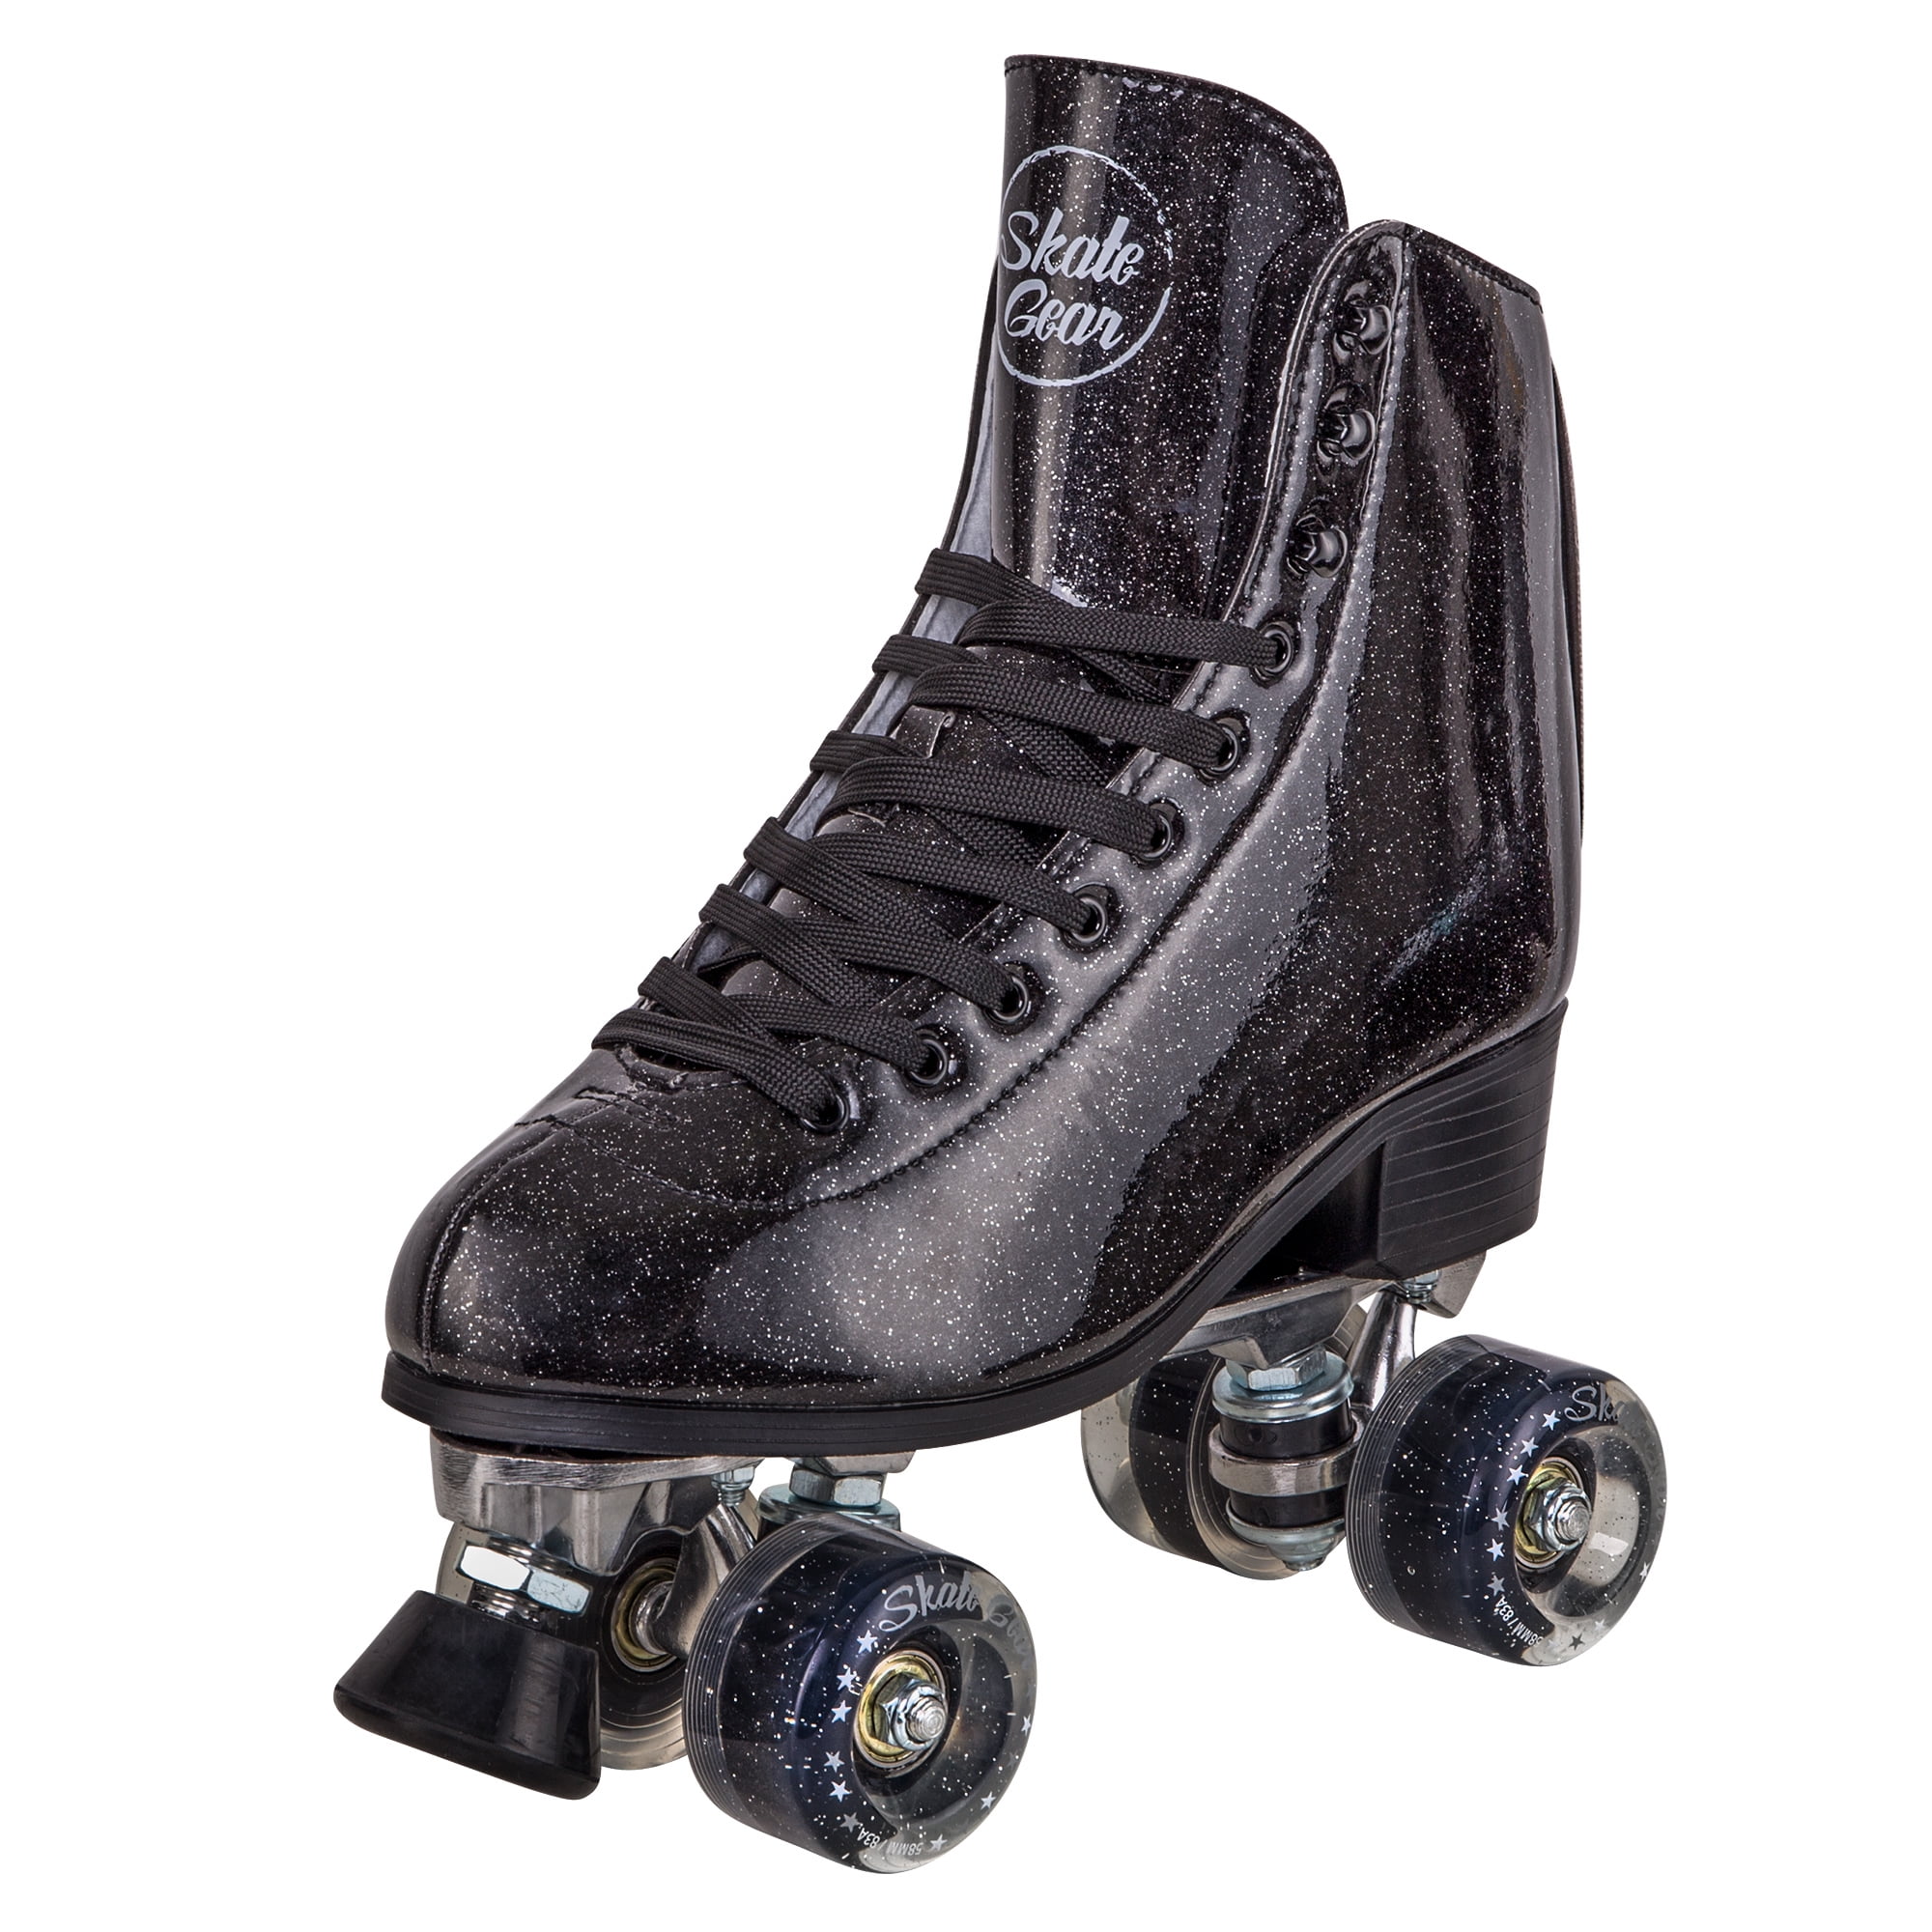 Women's Roller Skates,Faux Leather Roller Skates High-top Roller Skates Four-Wheel Roller Skates Shiny Roller Skates for Kids and Adults 